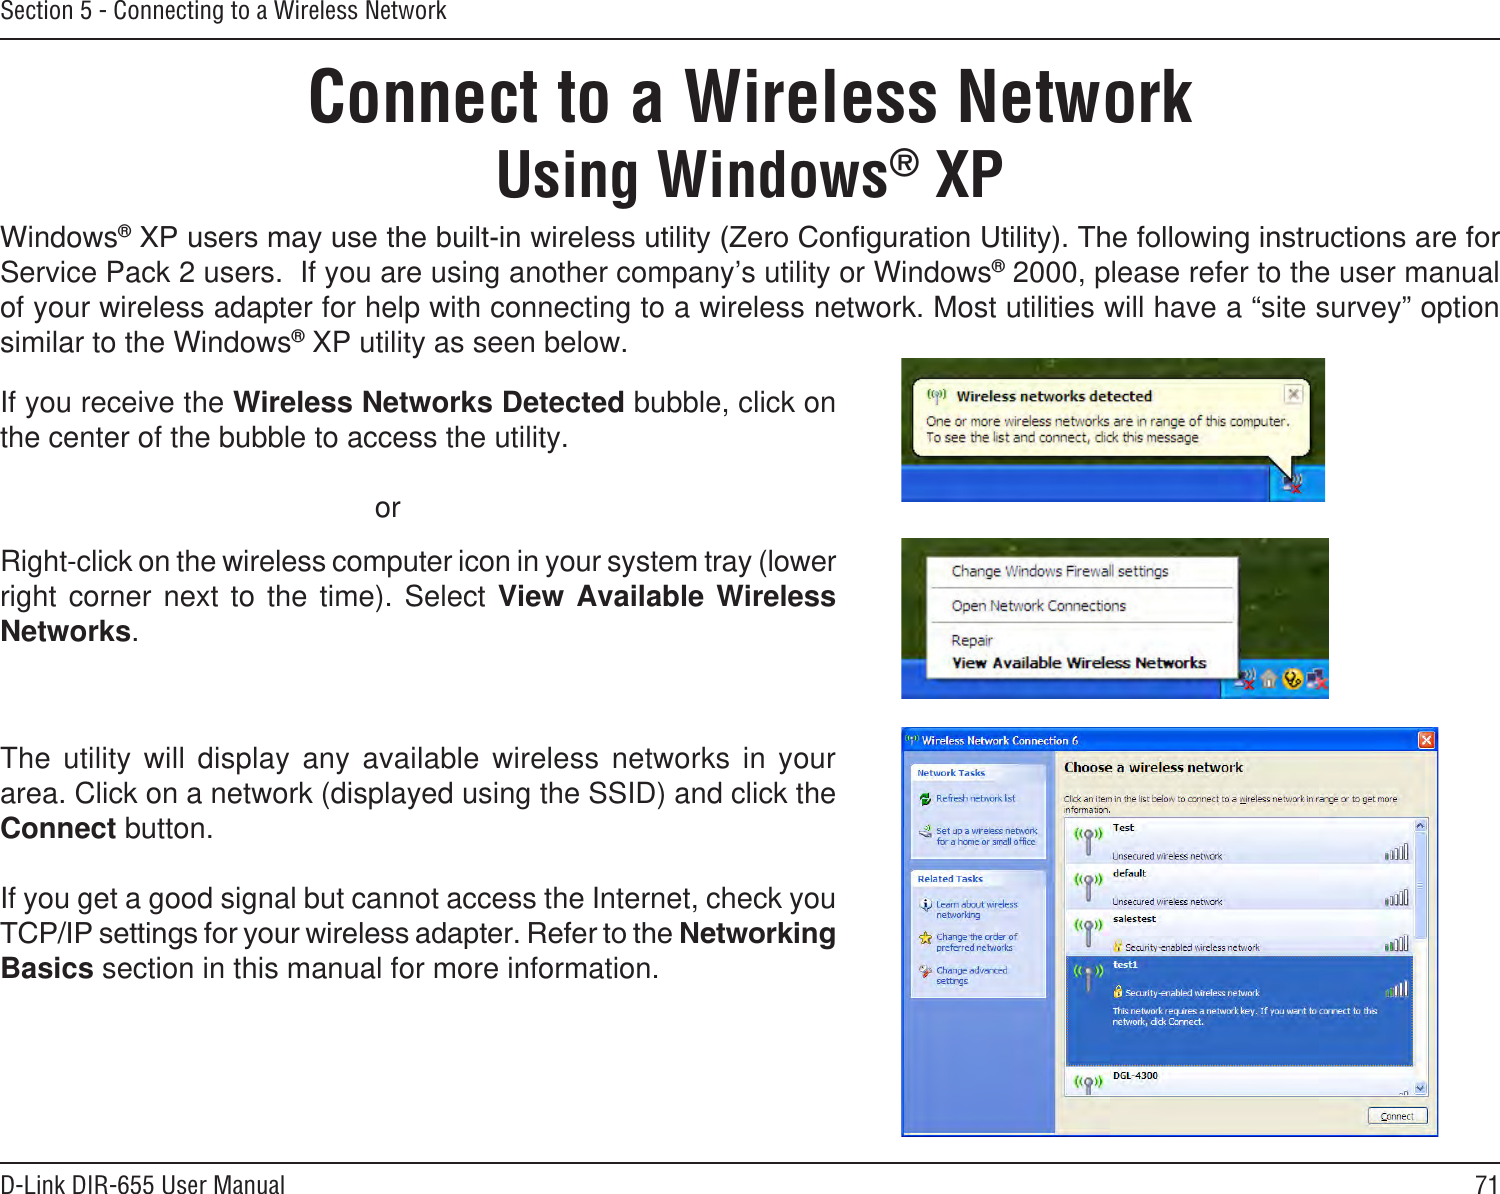 71D-Link DIR-655 User ManualSection 5 - Connecting to a Wireless NetworkConnect to a Wireless NetworkUsing Windows® XPWindows®Service Pack 2 users.  If you are using another company’s utility or Windows® 2000, please refer to the user manual of your wireless adapter for help with connecting to a wireless network. Most utilities will have a “site survey” option similar to the Windows® XP utility as seen below.Right-click on the wireless computer icon in your system tray (lower right  corner  next  to  the  time).  Select  View  Available  Wireless Networks.If you receive the Wireless Networks Detected bubble, click on the center of the bubble to access the utility.     orThe  utility  will  display  any  available  wireless  networks  in  your area. Click on a network (displayed using the SSID) and click the Connect button.If you get a good signal but cannot access the Internet, check you Basics section in this manual for more information.